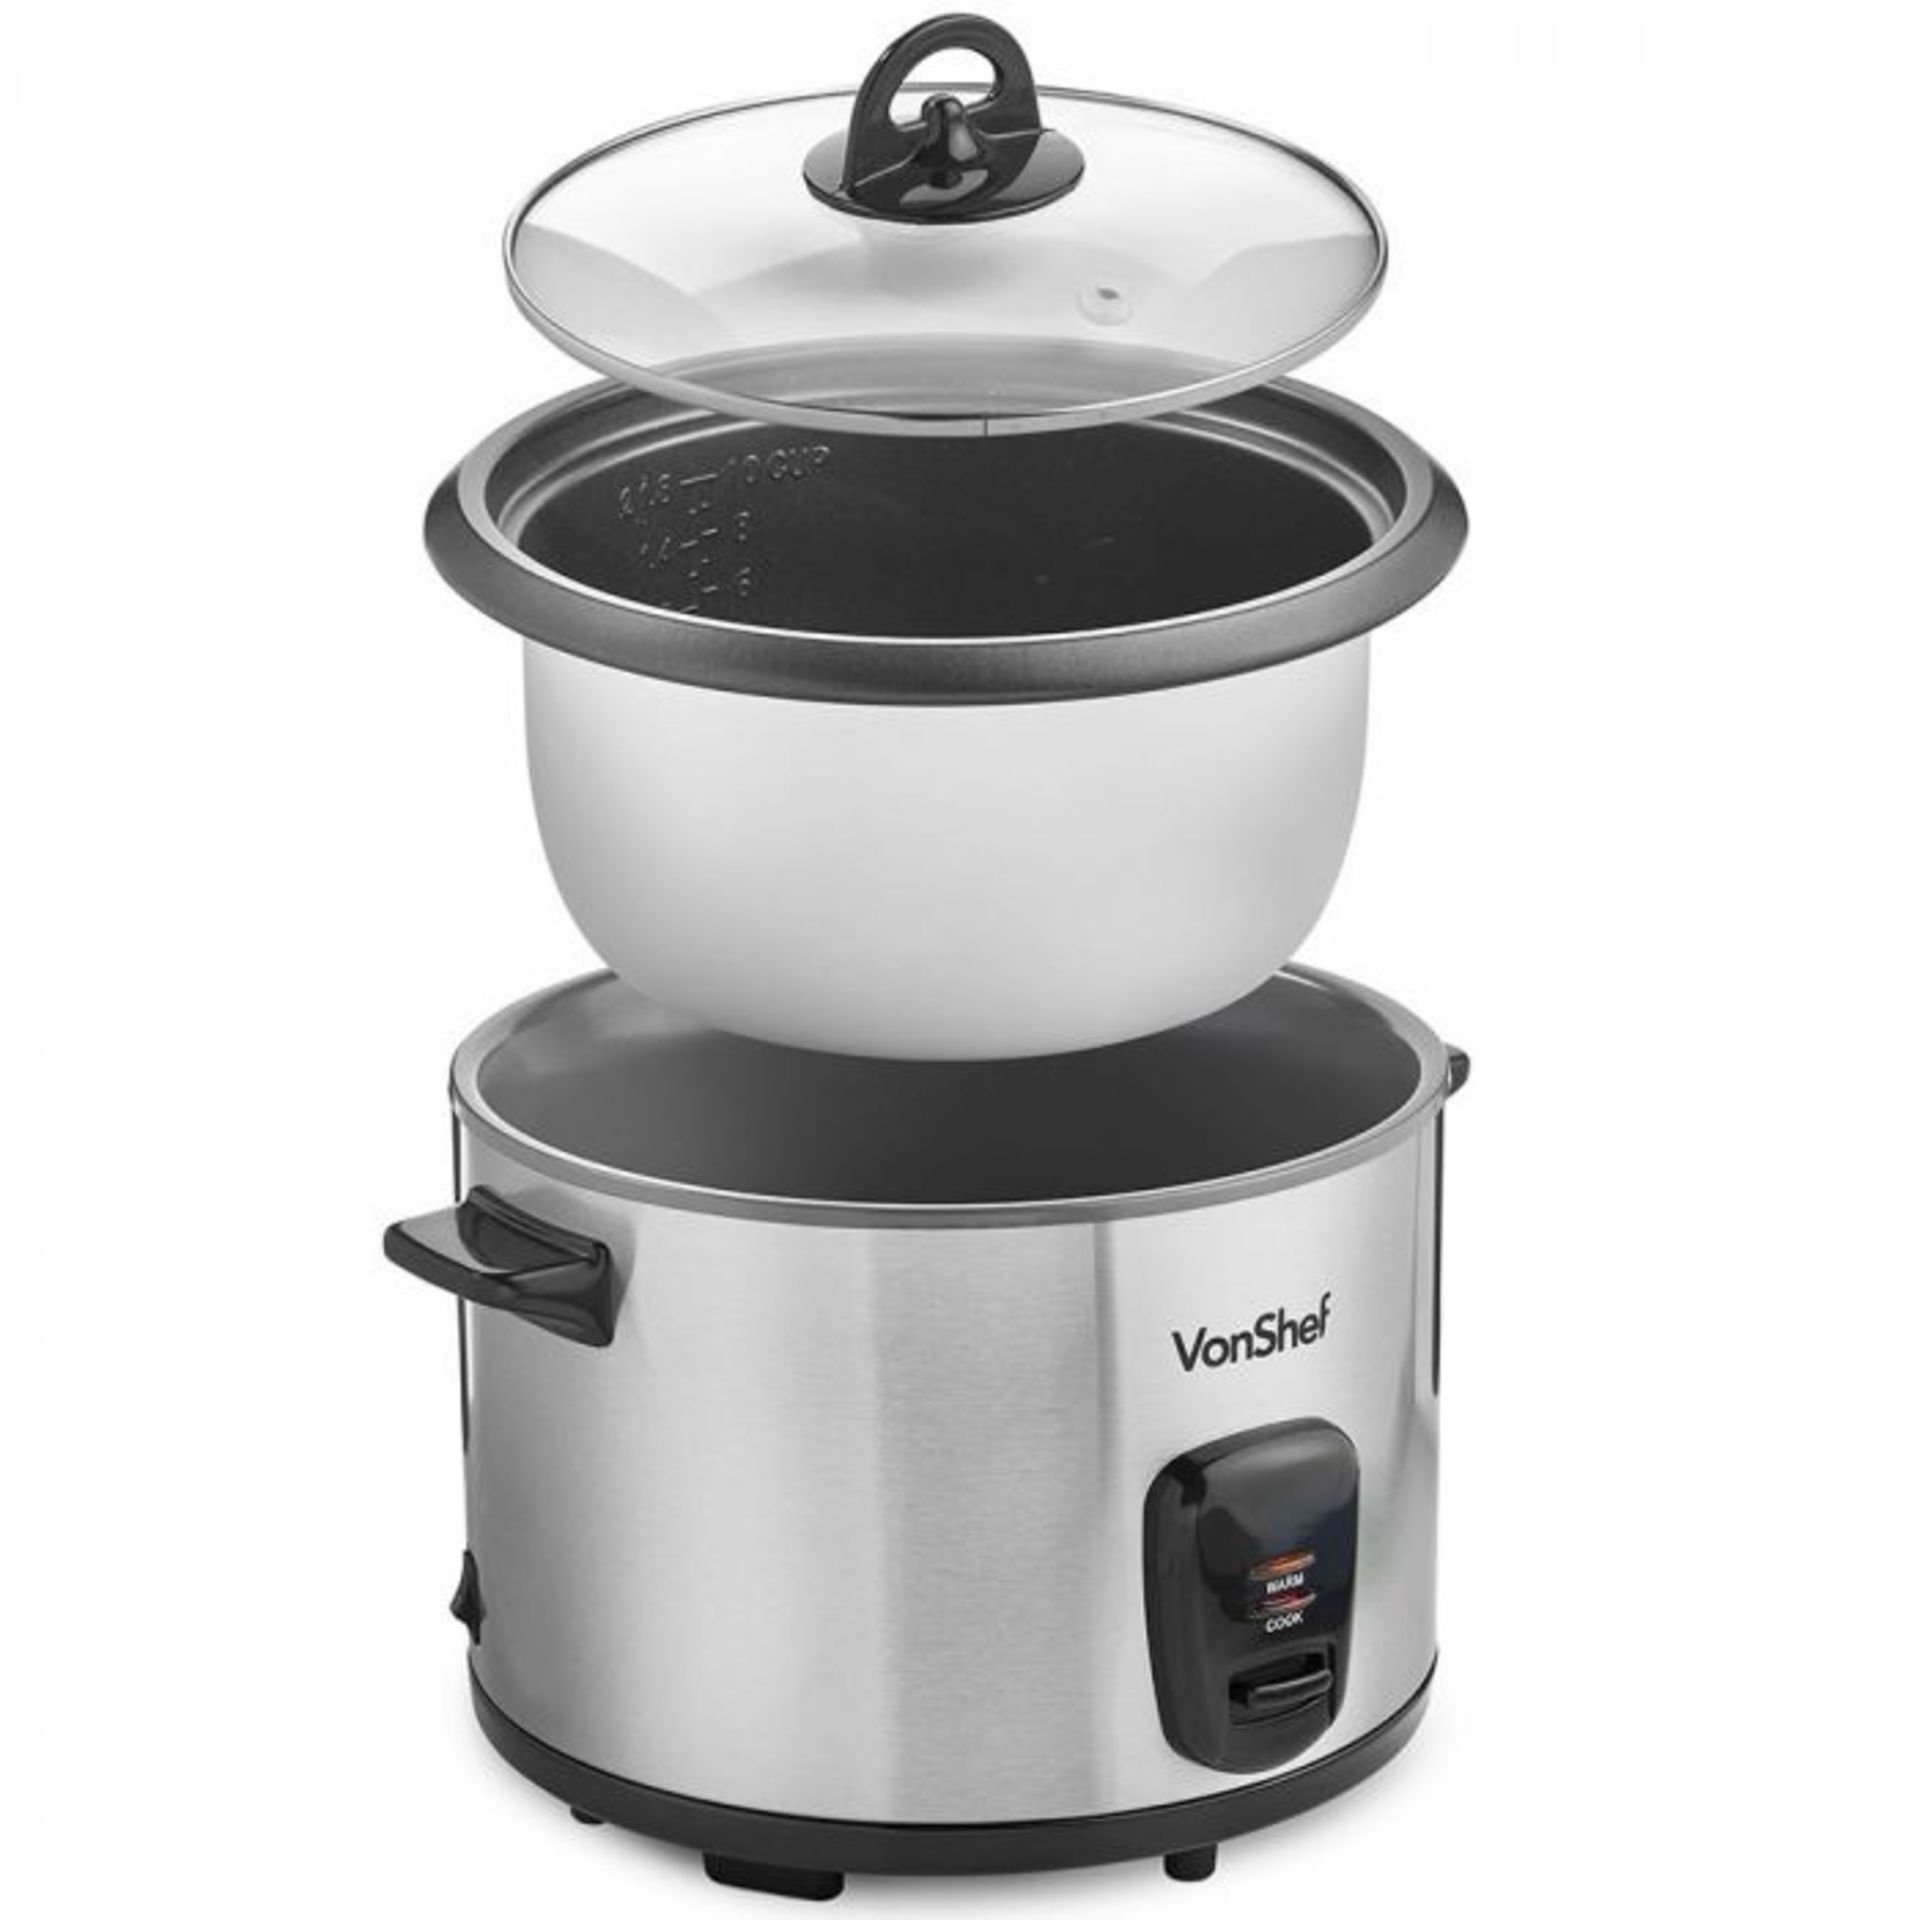 (NN3) 700W Rice Cooker Cook up deliciously fluffy rice with the easy to use 700W Rice Cooker ... - Image 5 of 5